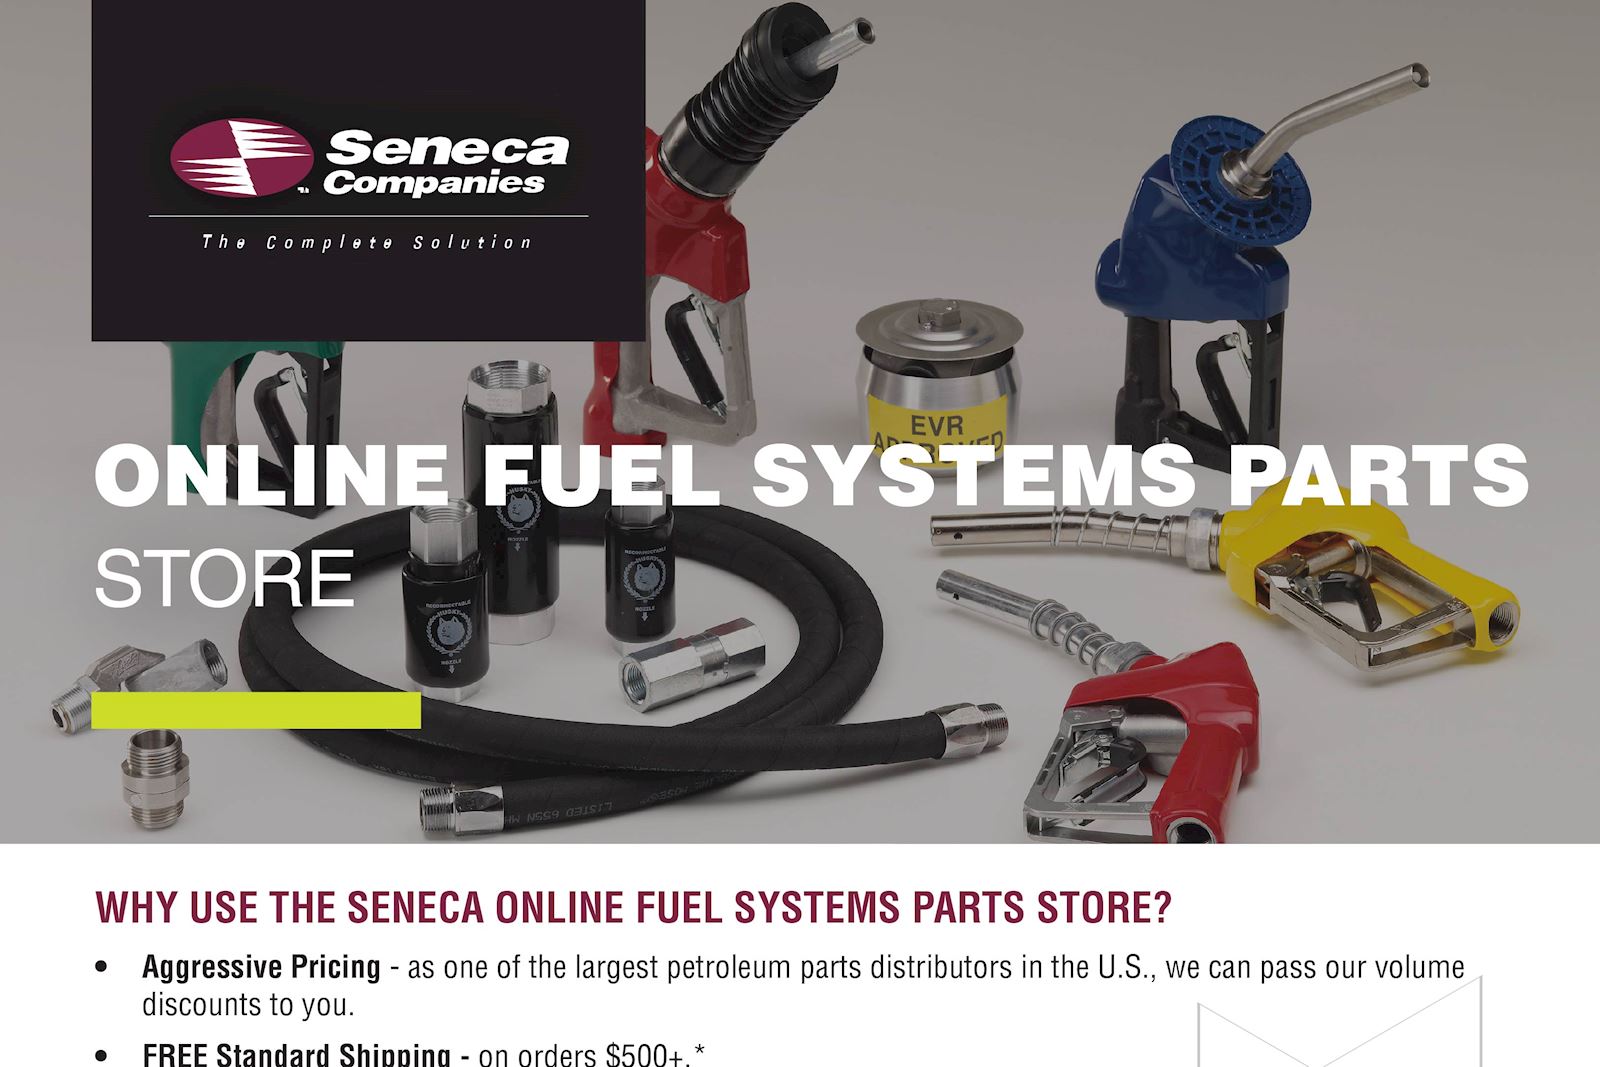 Online Fuel Systems Parts Store